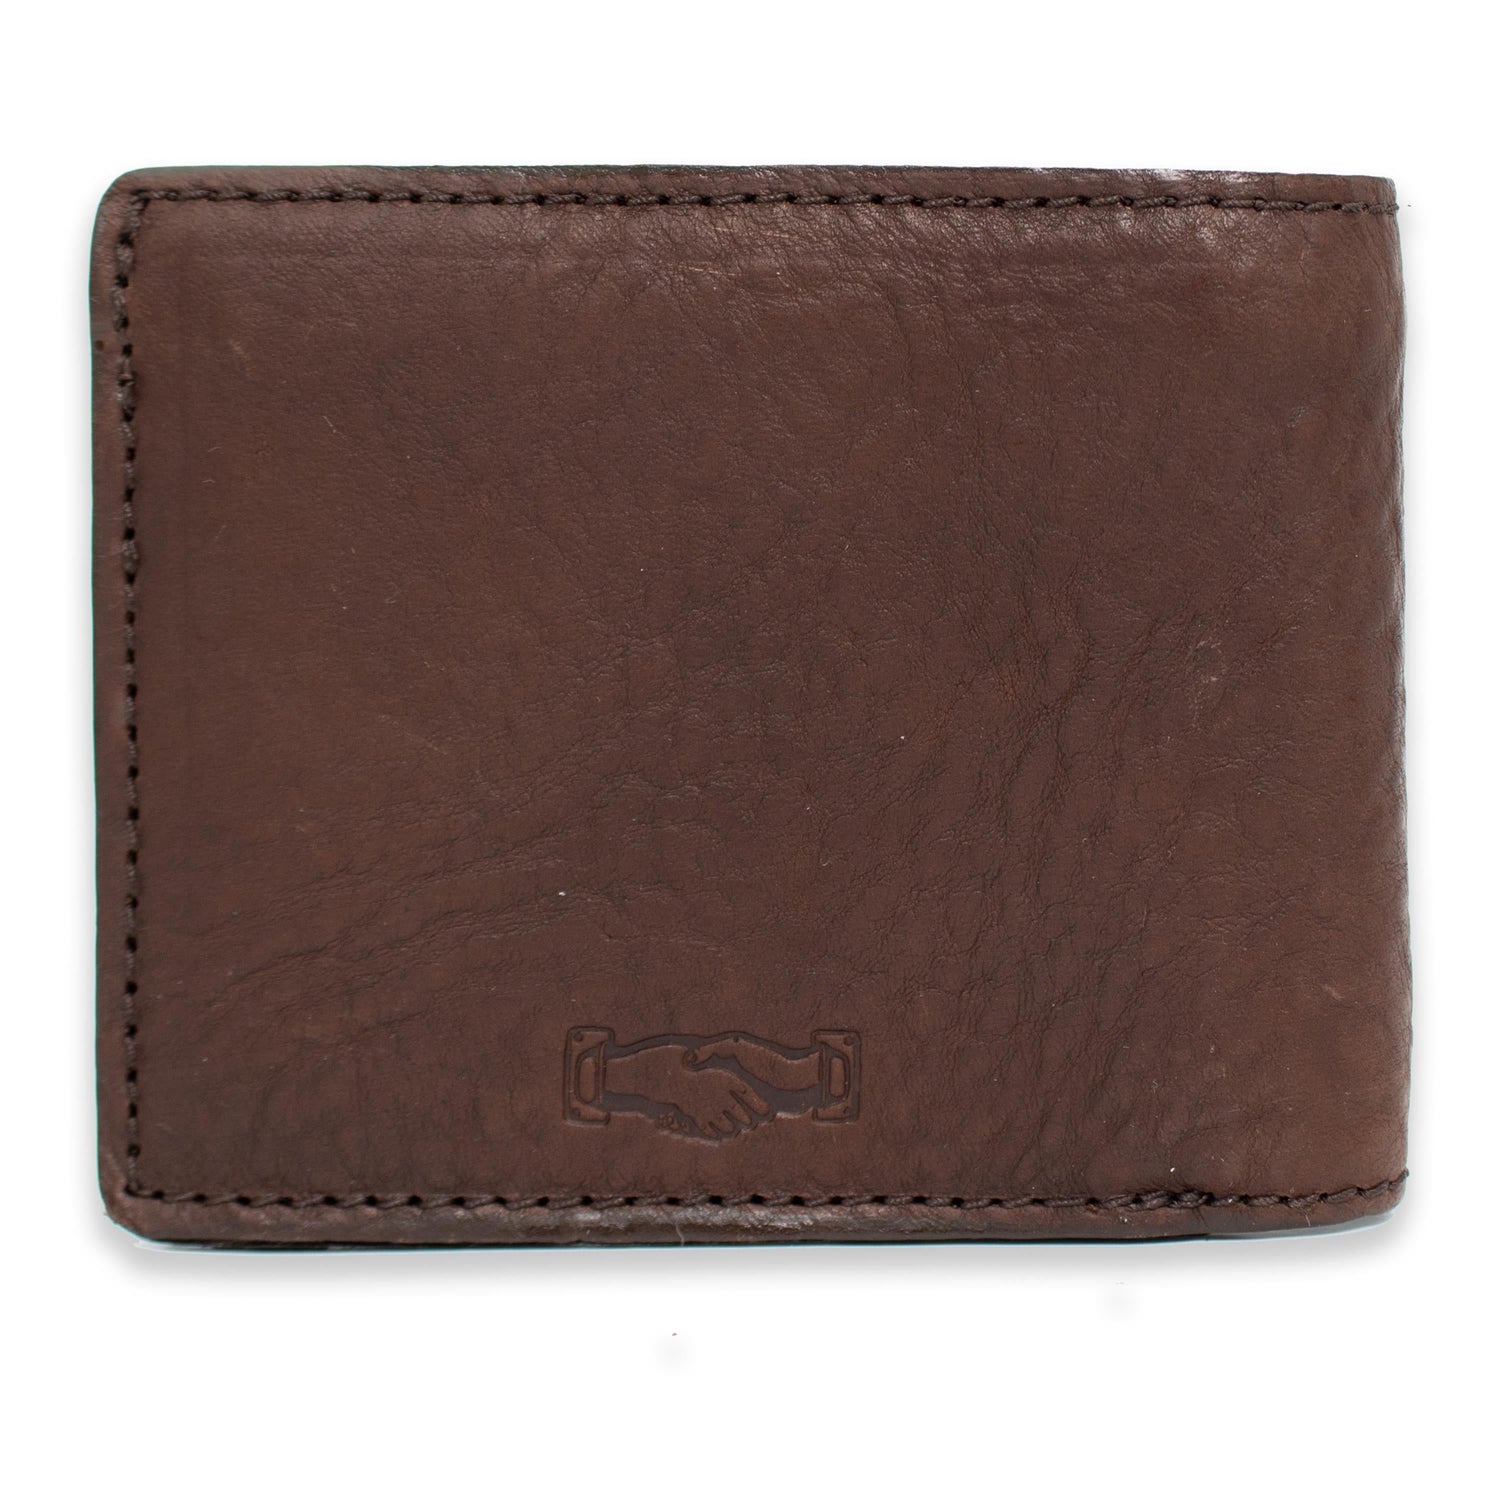 Texas A&M Campaign Leather Bi-Fold Wallet